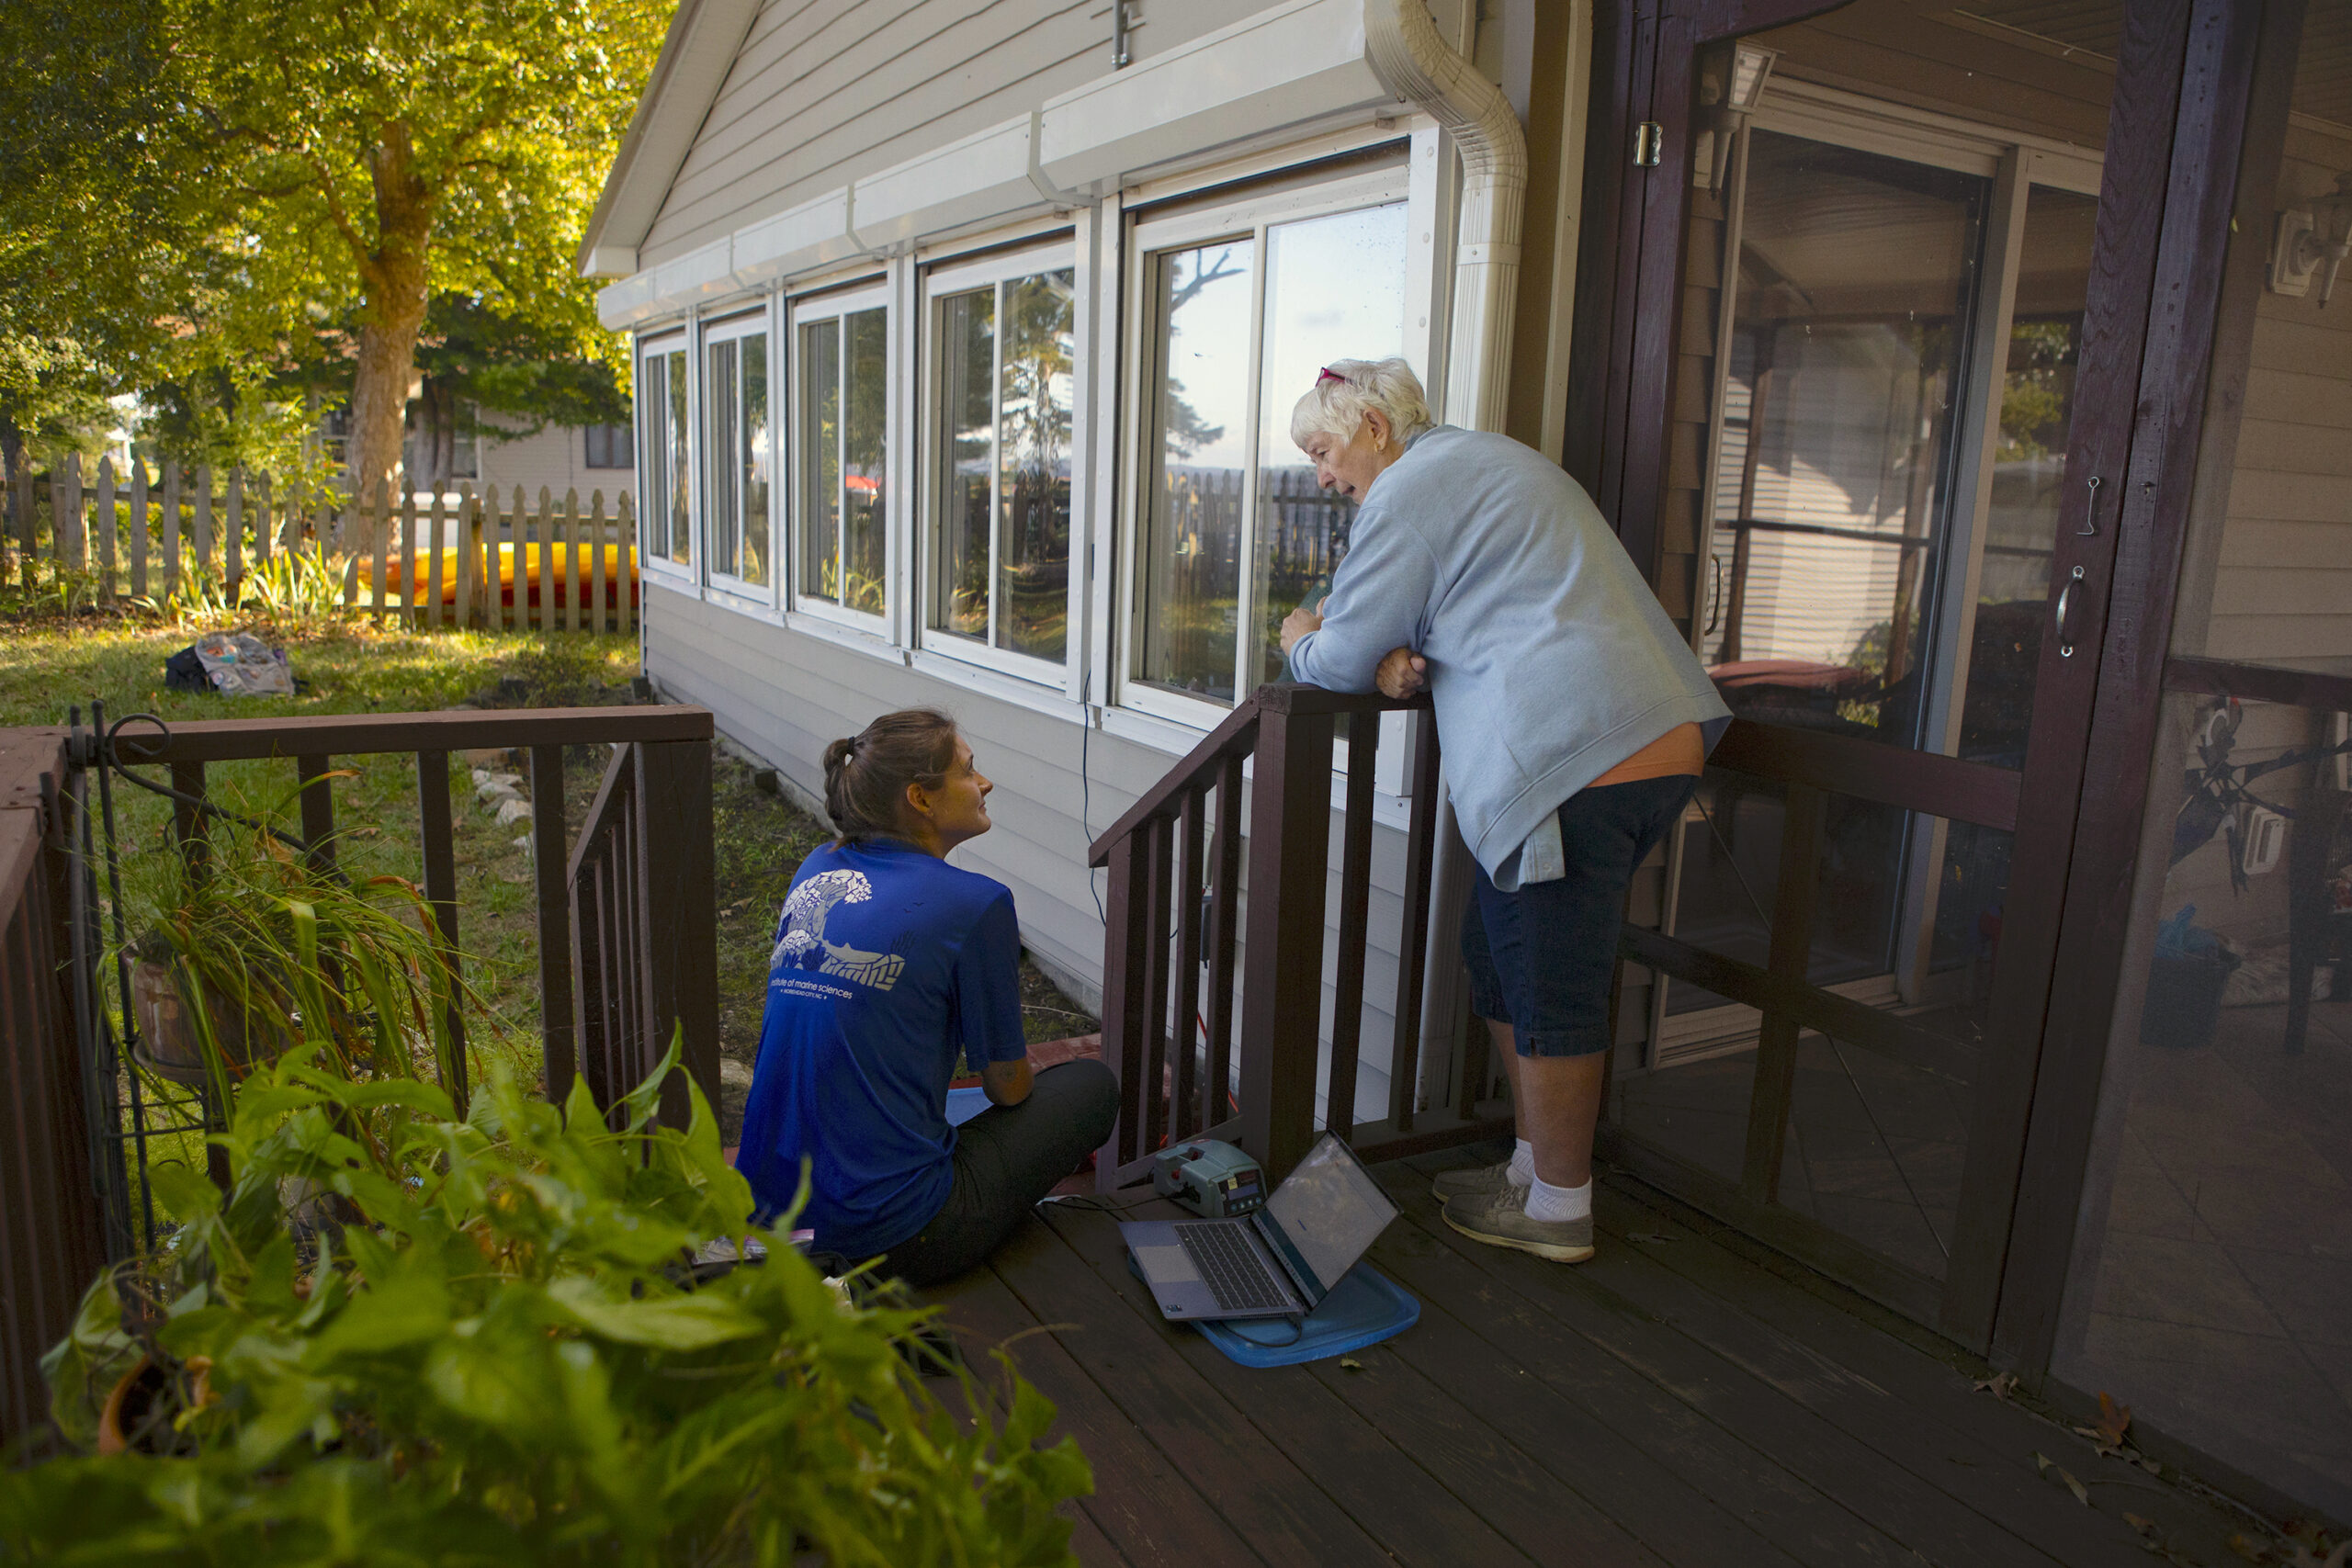 A woman leans against a porch railing and talks with a researcher, who is seated on the porch step.